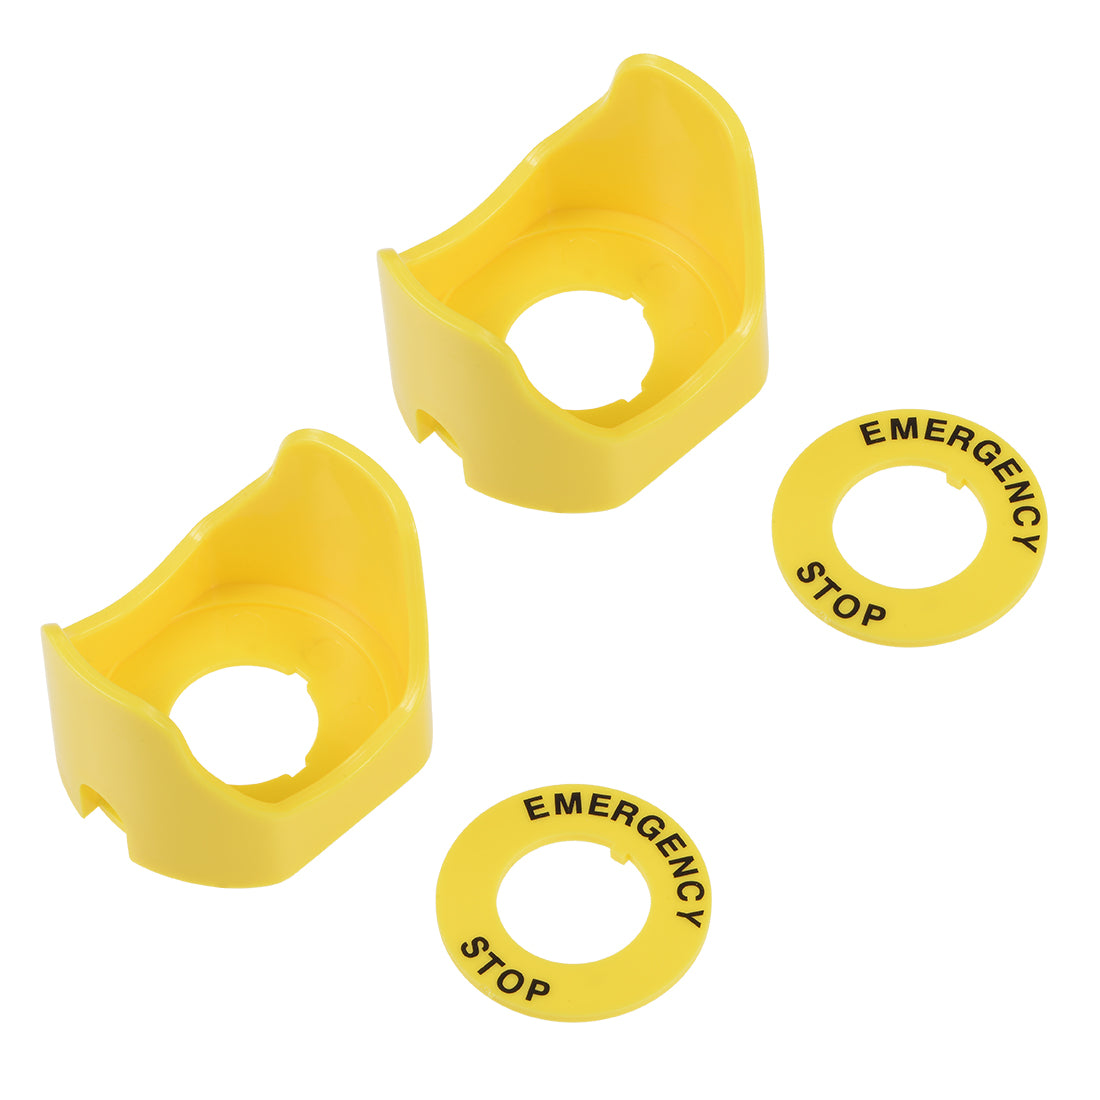 uxcell Uxcell 22mm Plastic Two Feet Push Switch Button Protective Cover With Emergency Stop Warning Circle Yellow 2pcs